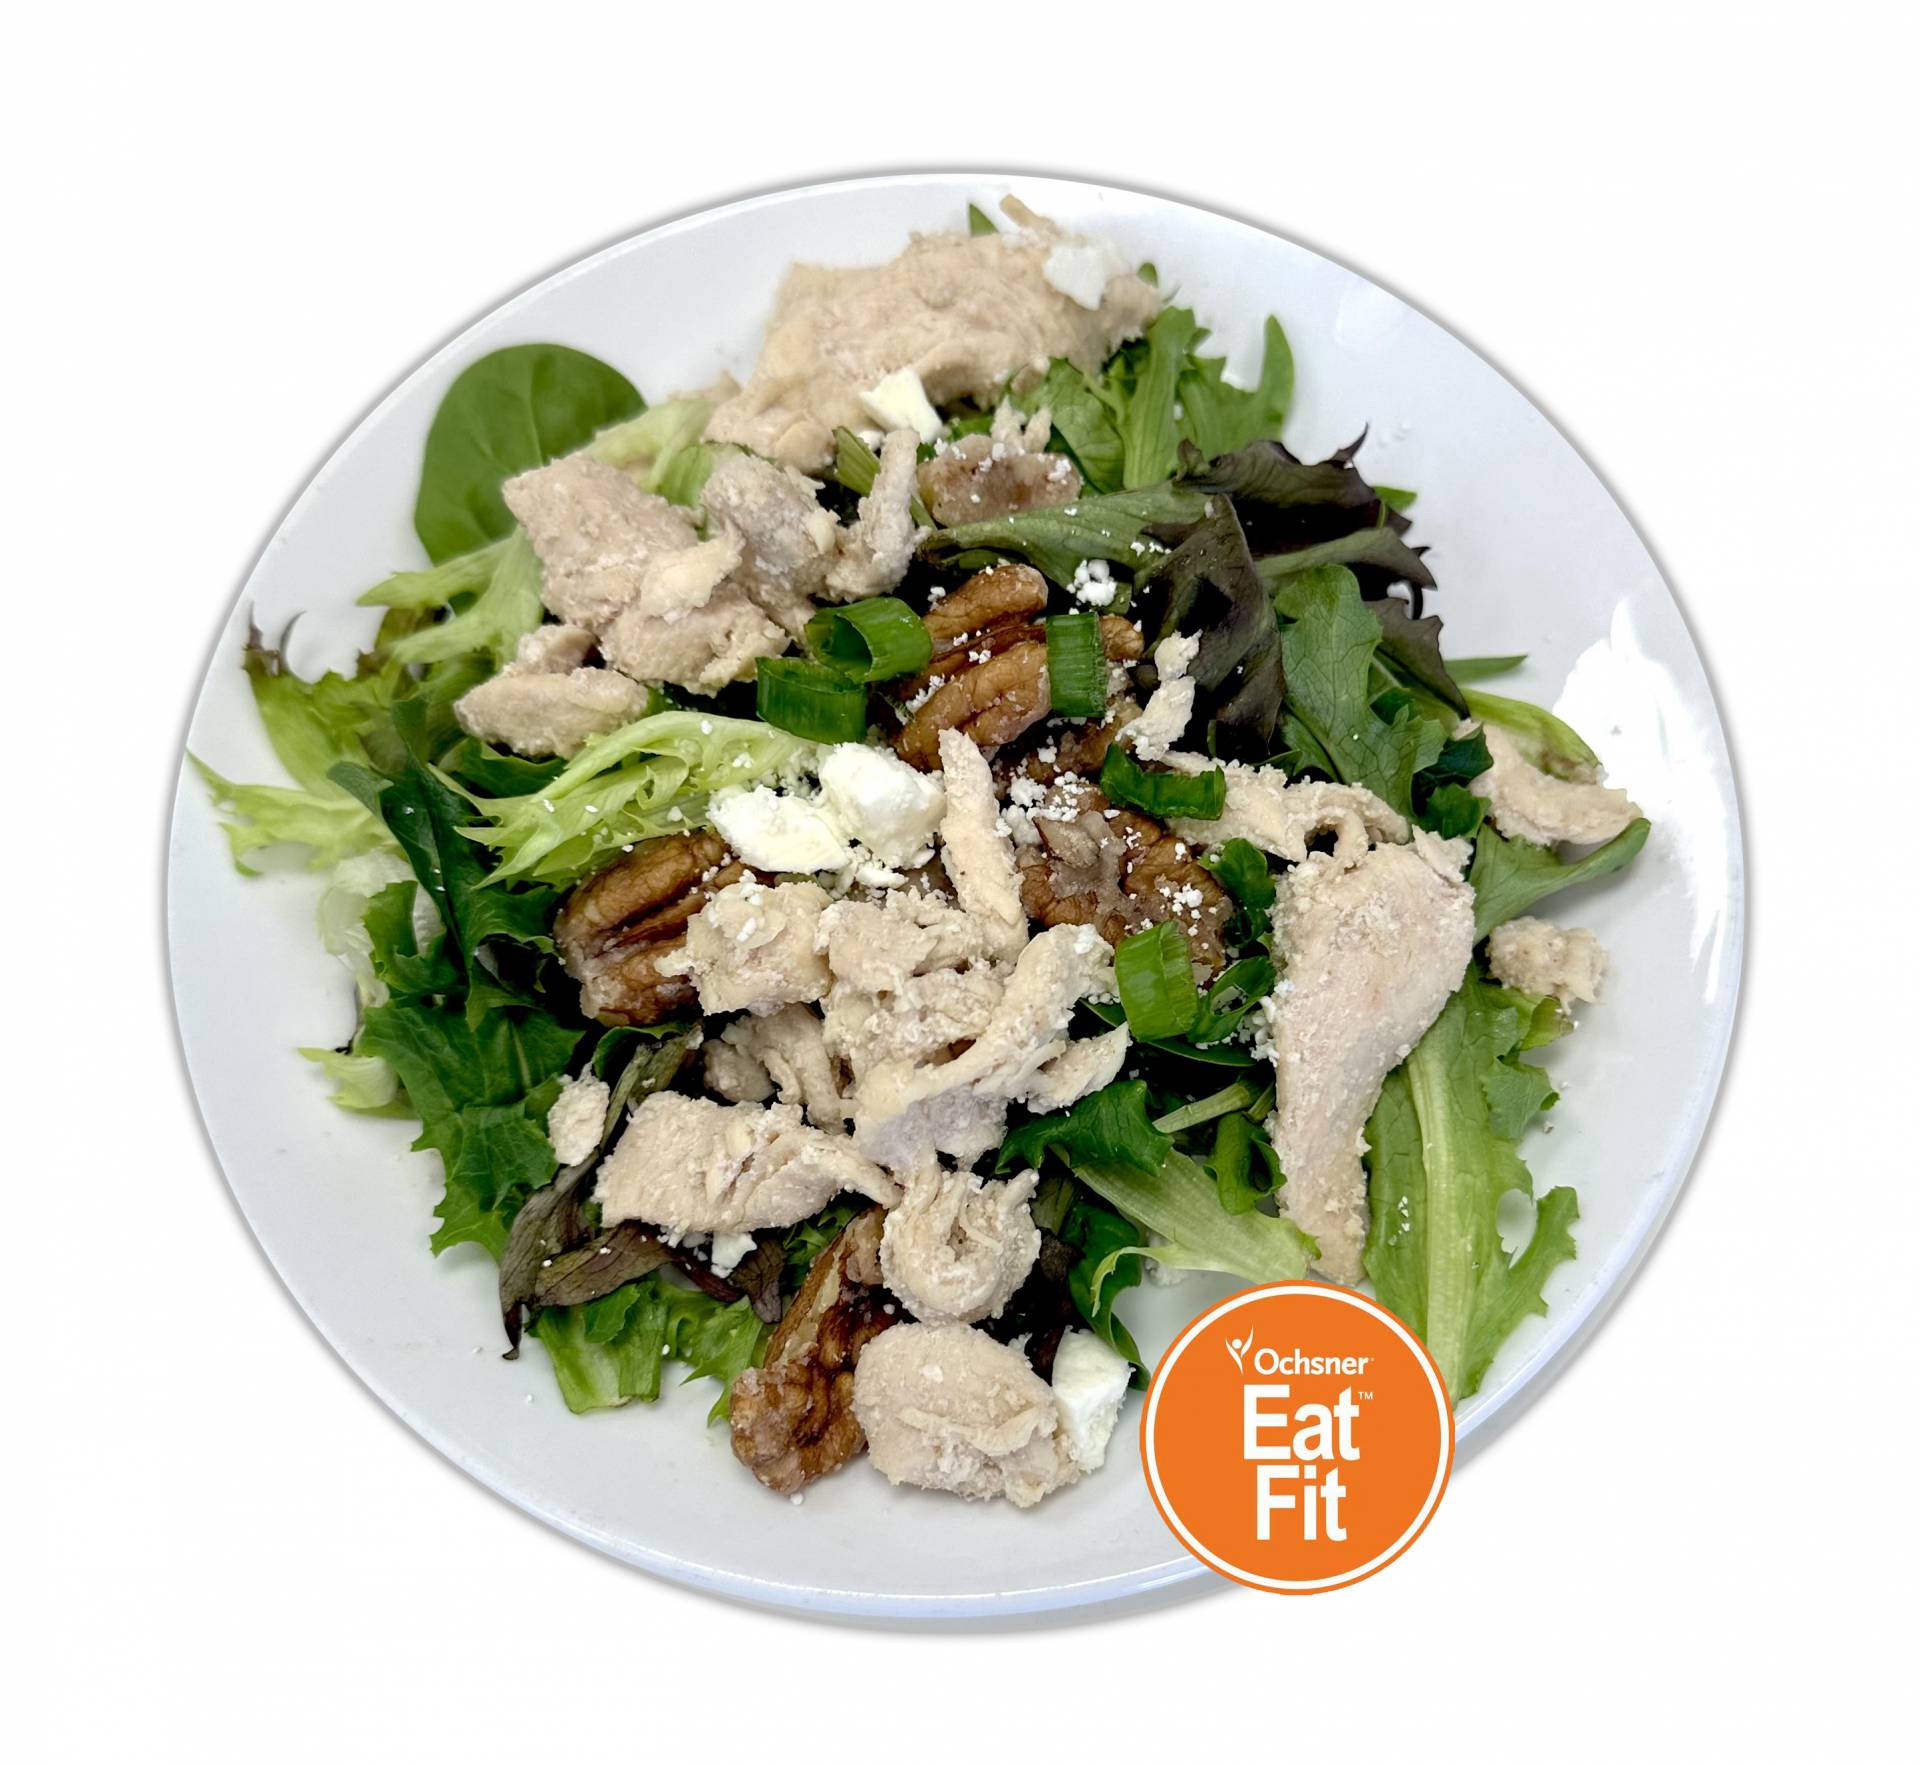 Grilled Chicken and Spinach Salad with Pecans and Balsamic Vinaigrette Dressing - Low Carb